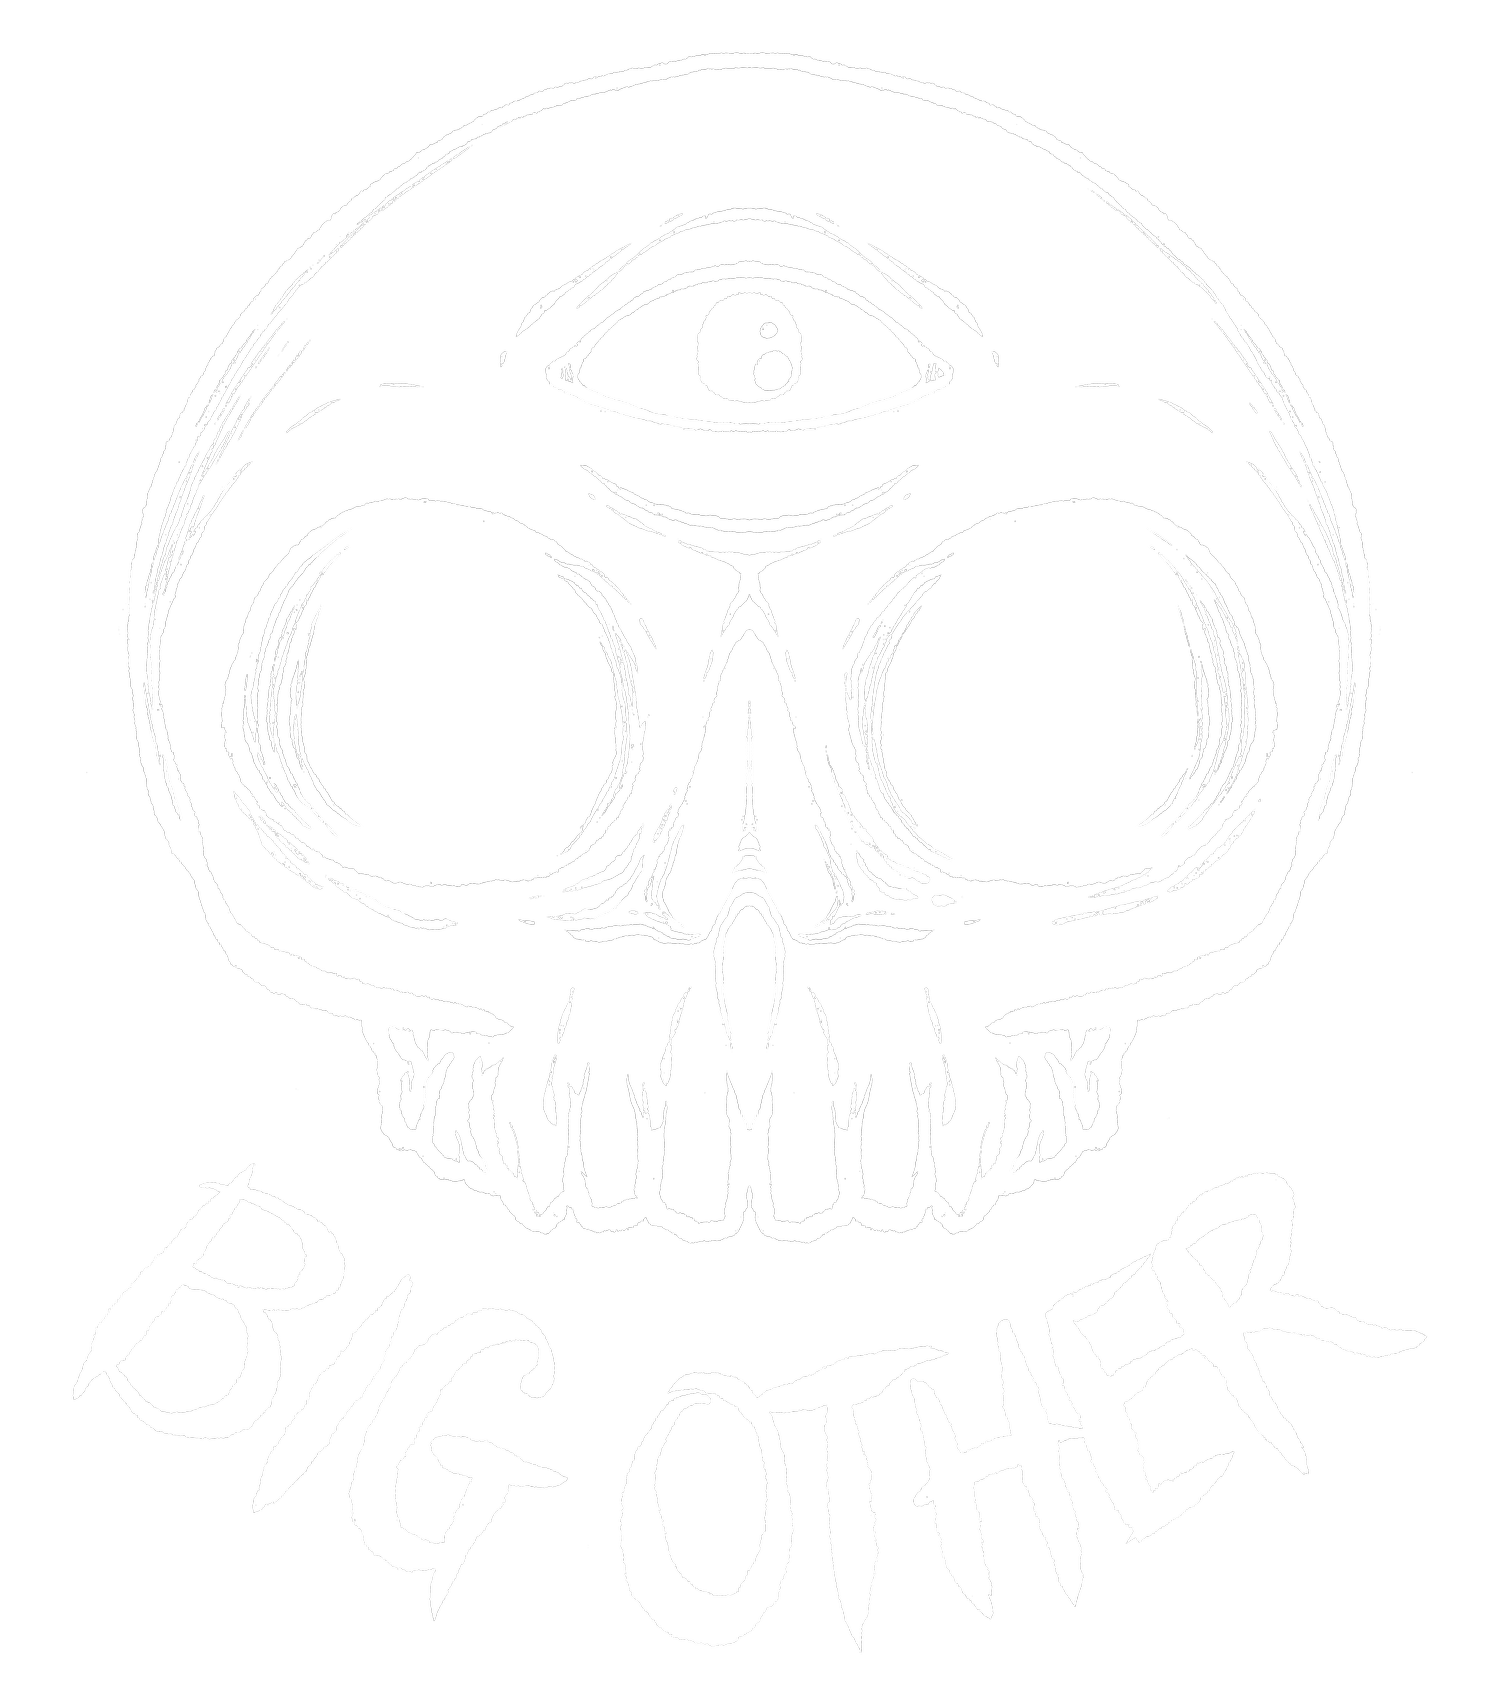 Big Other